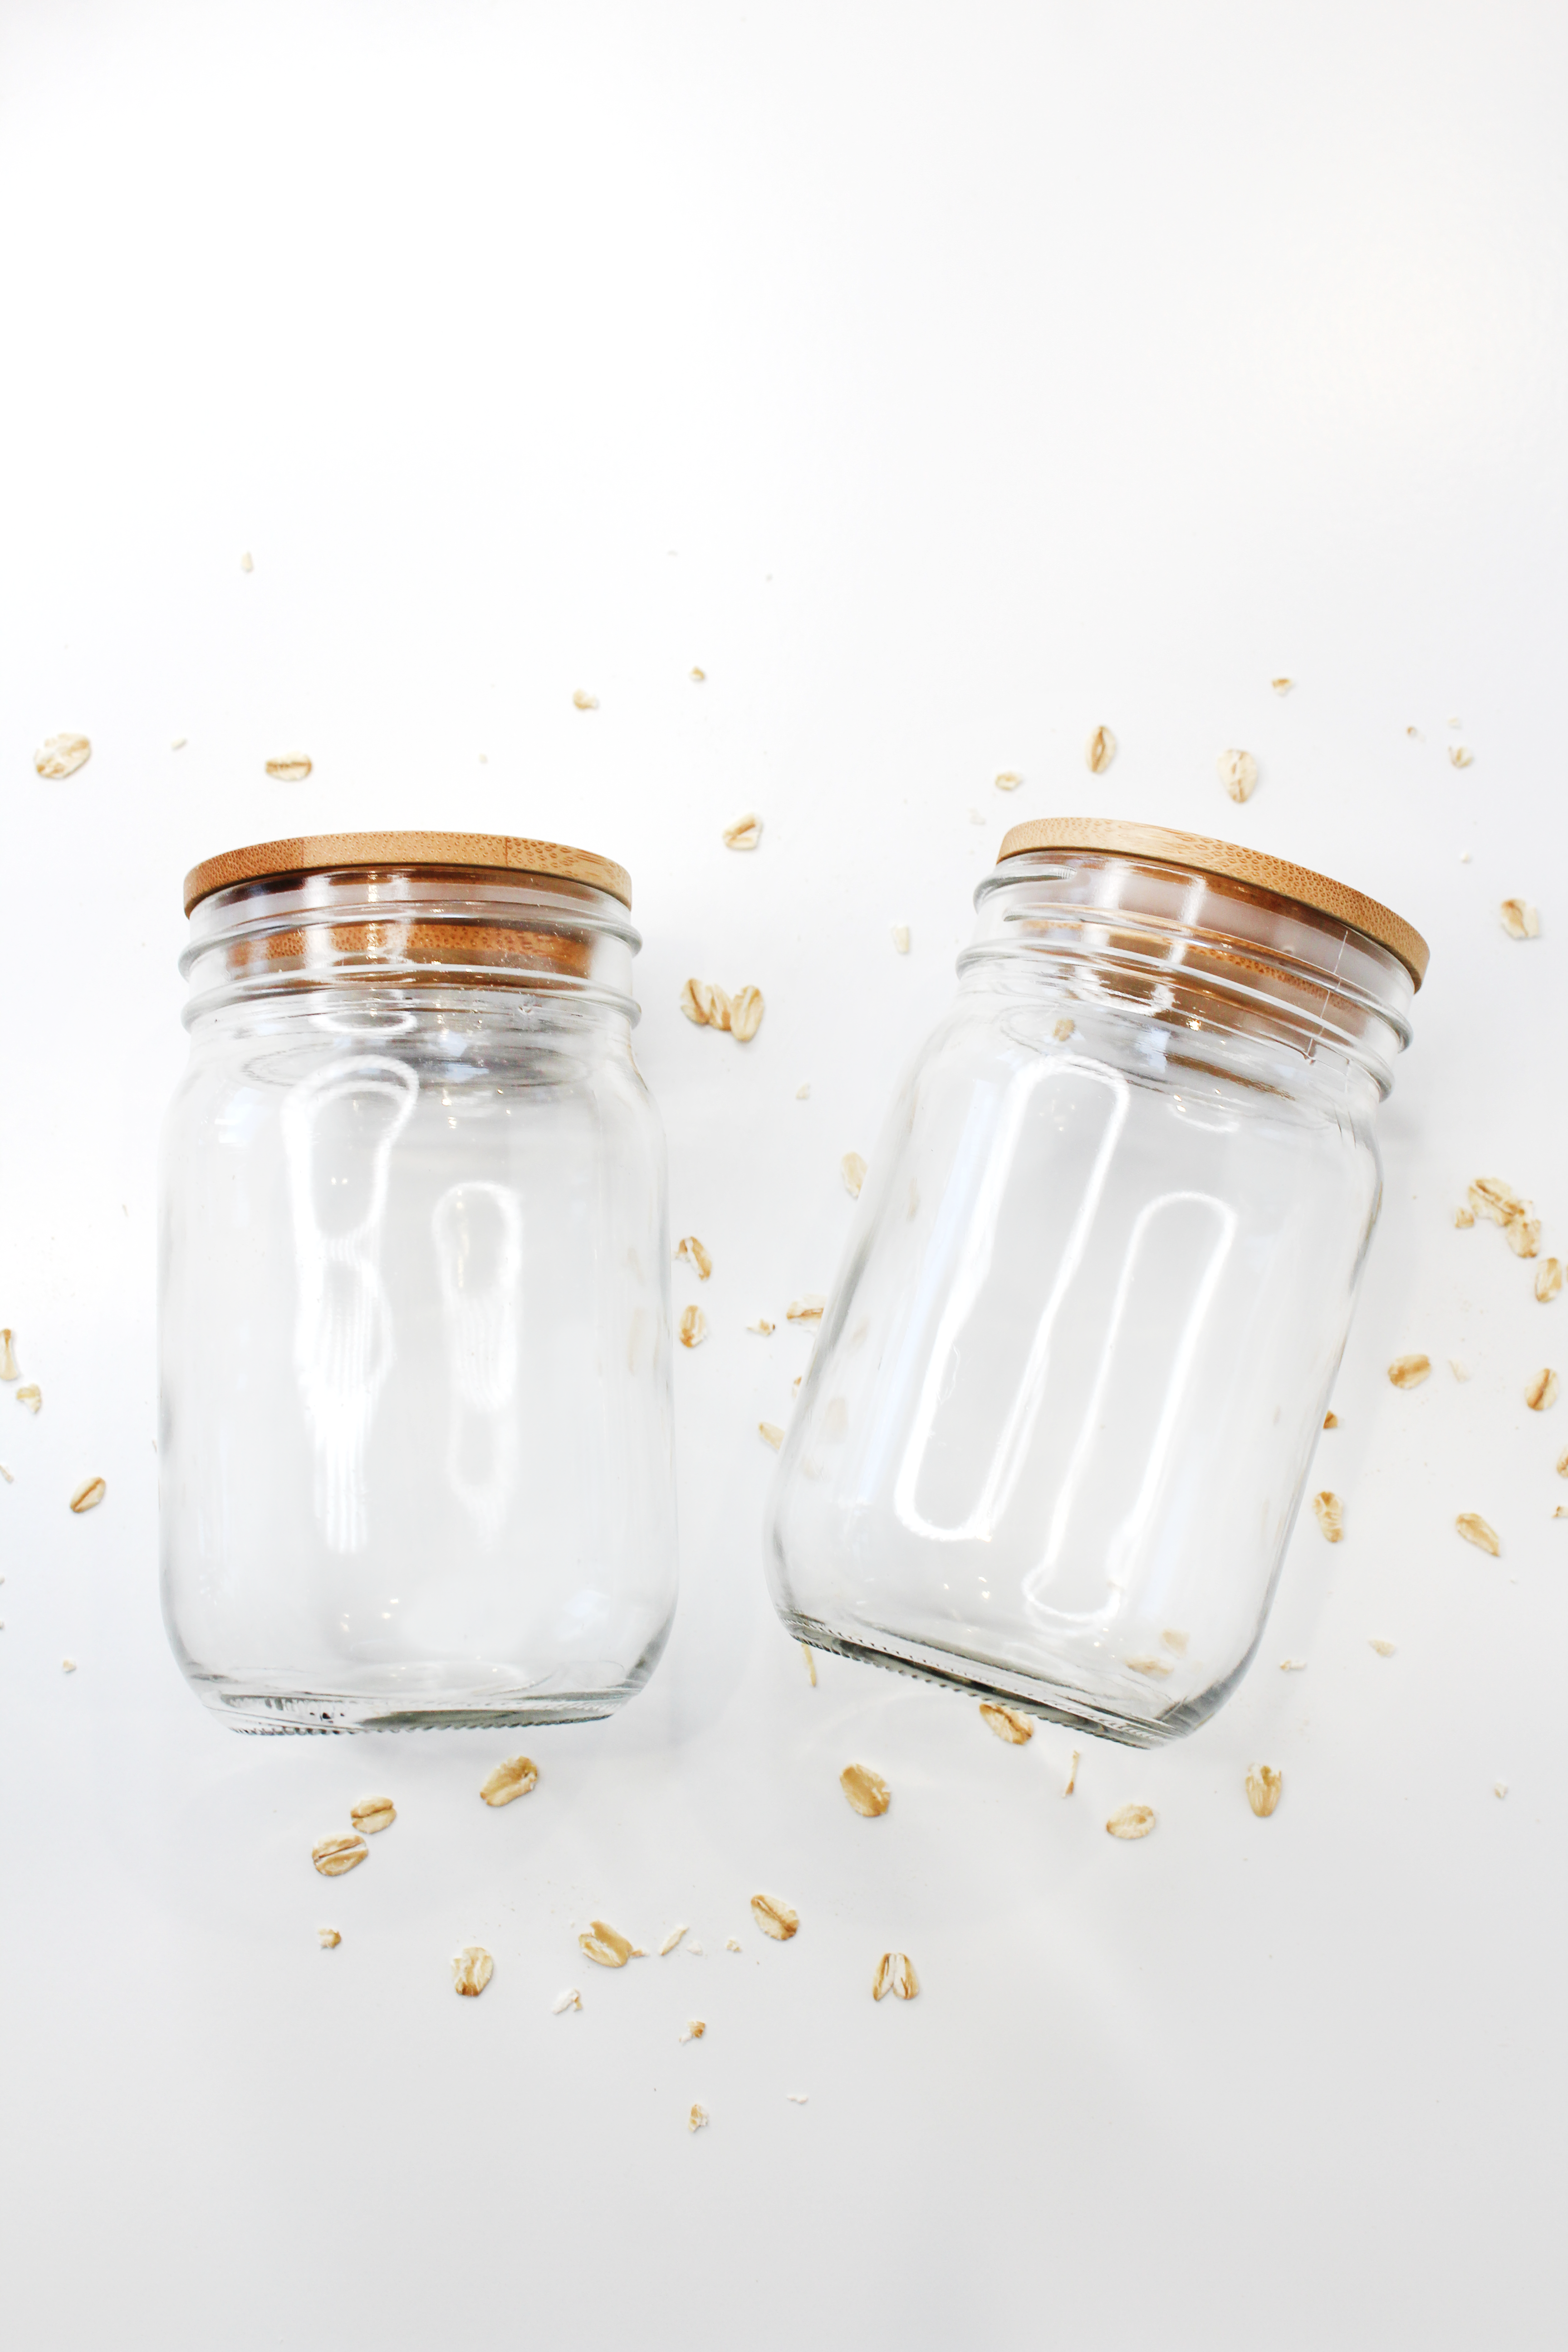 16 oz Premium Glass Jars with Handcrafted Bamboo Lids for Nursing